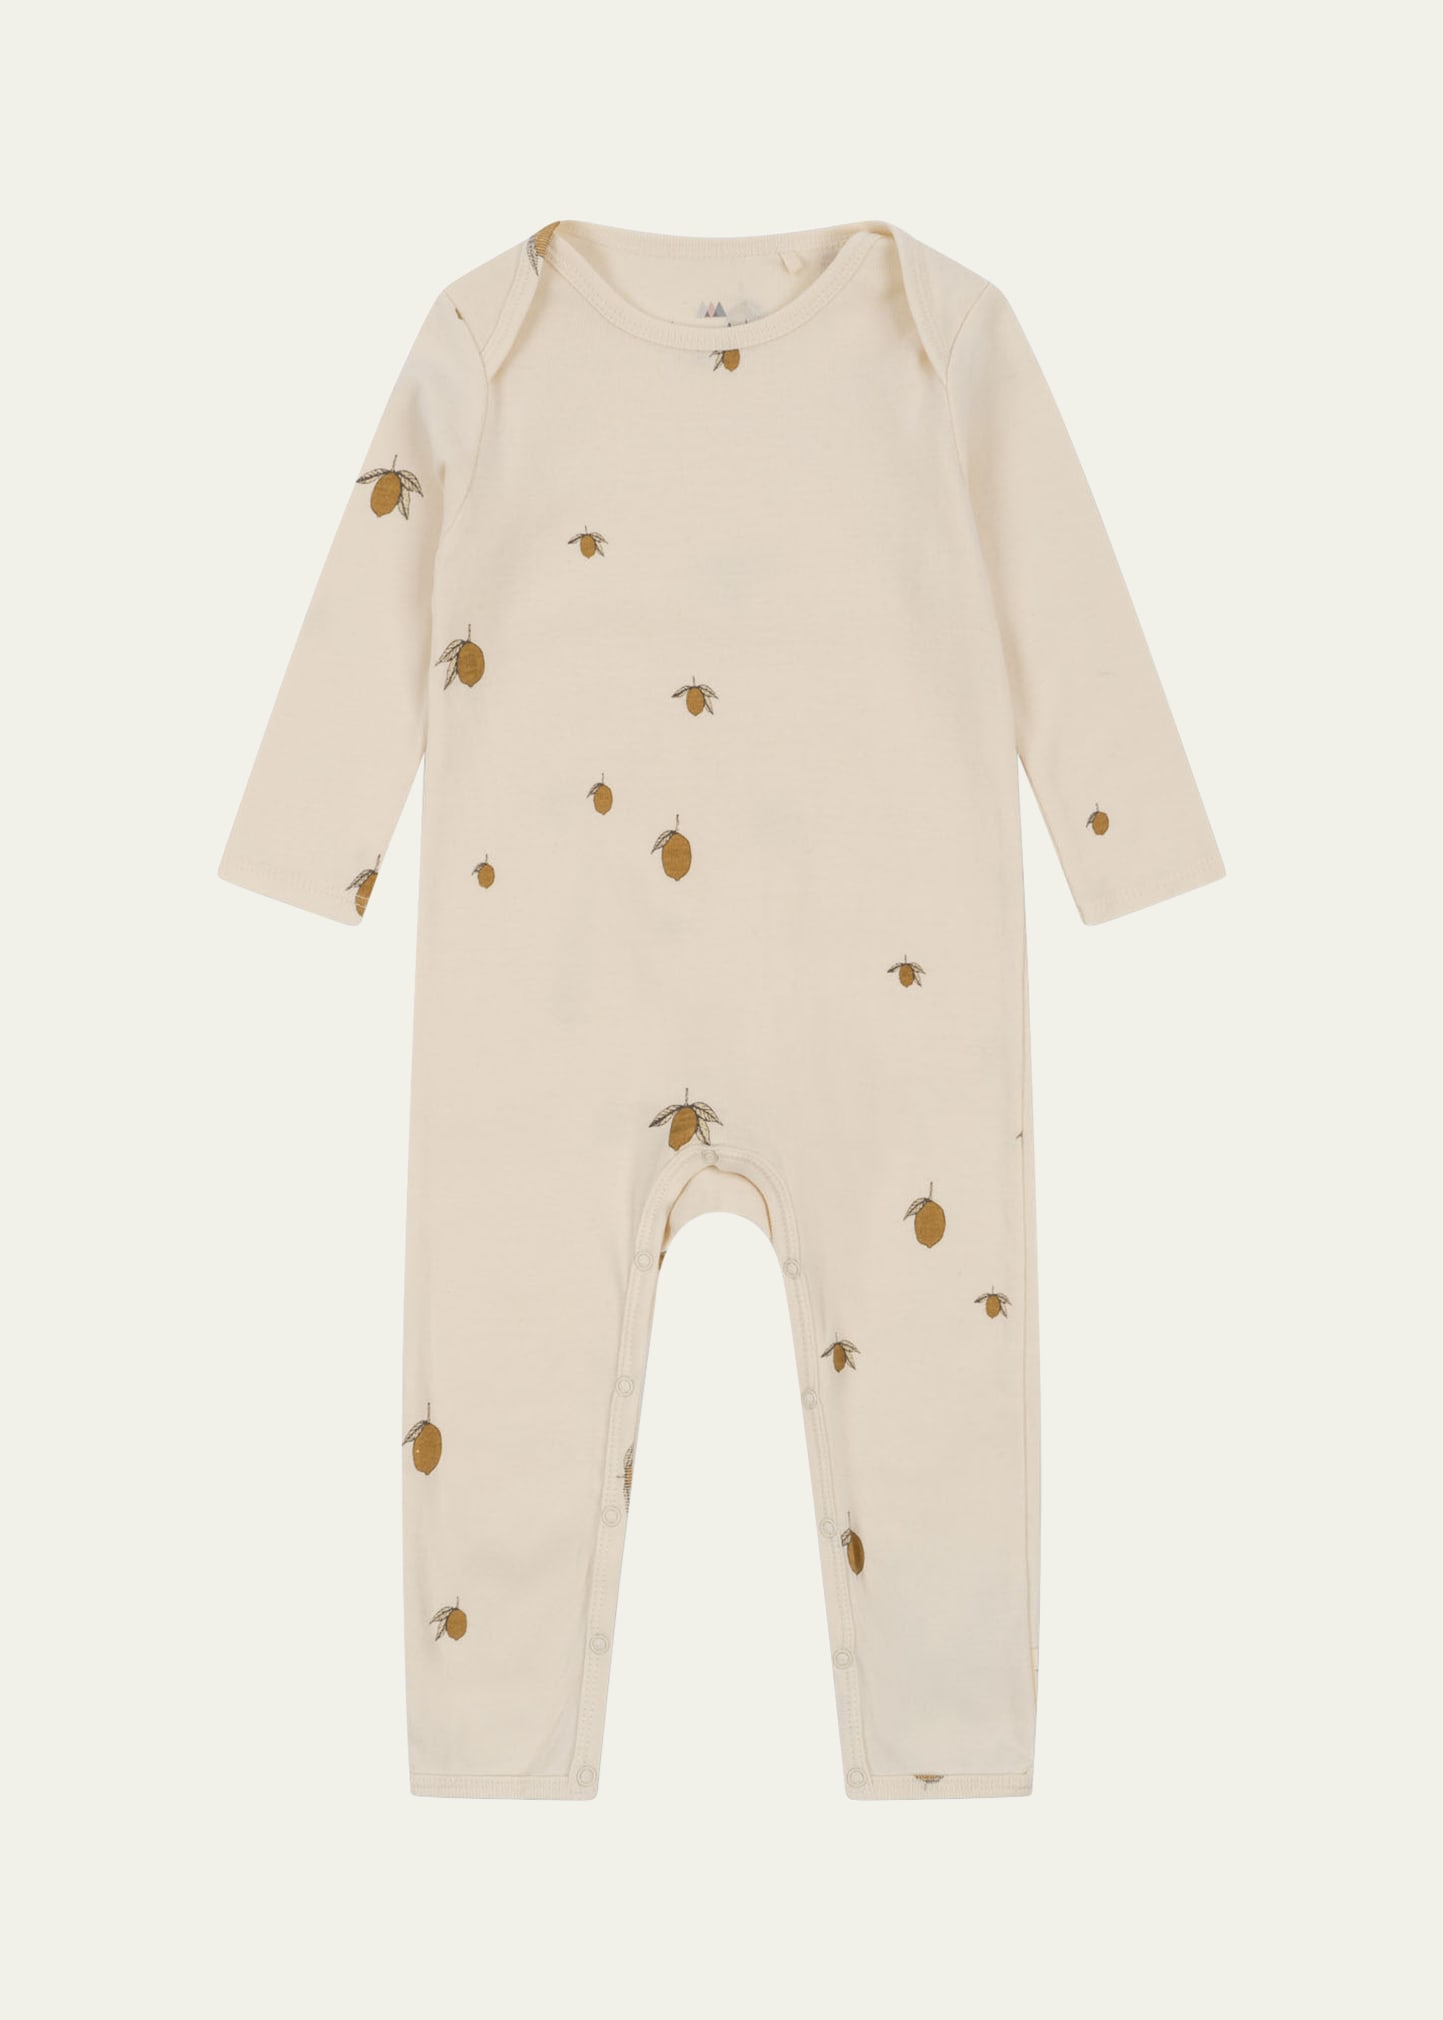 Kid's Fruit Motif Jersey Coverall, Size 9M-3T